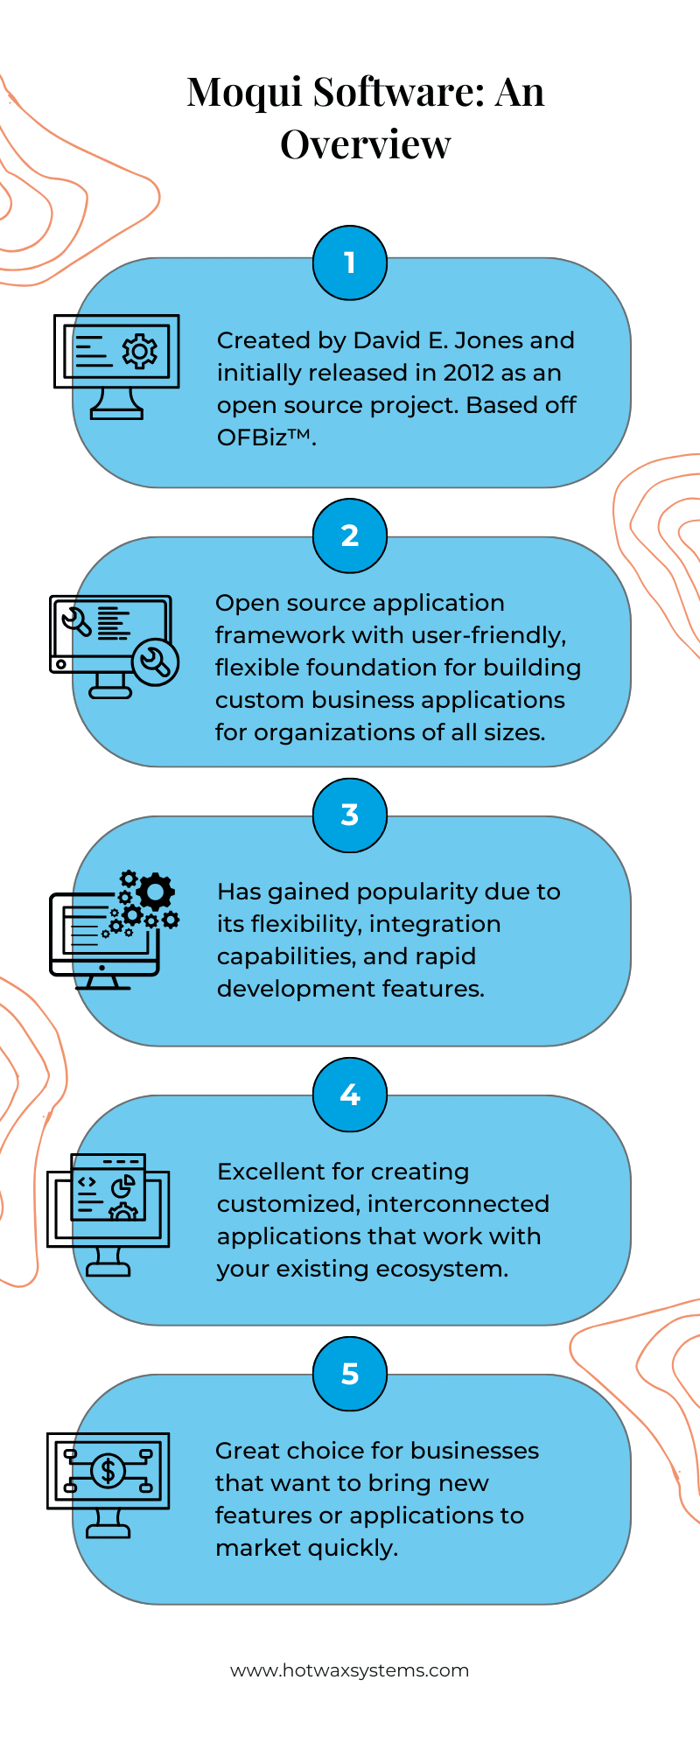 Infographic about Moqui software overview